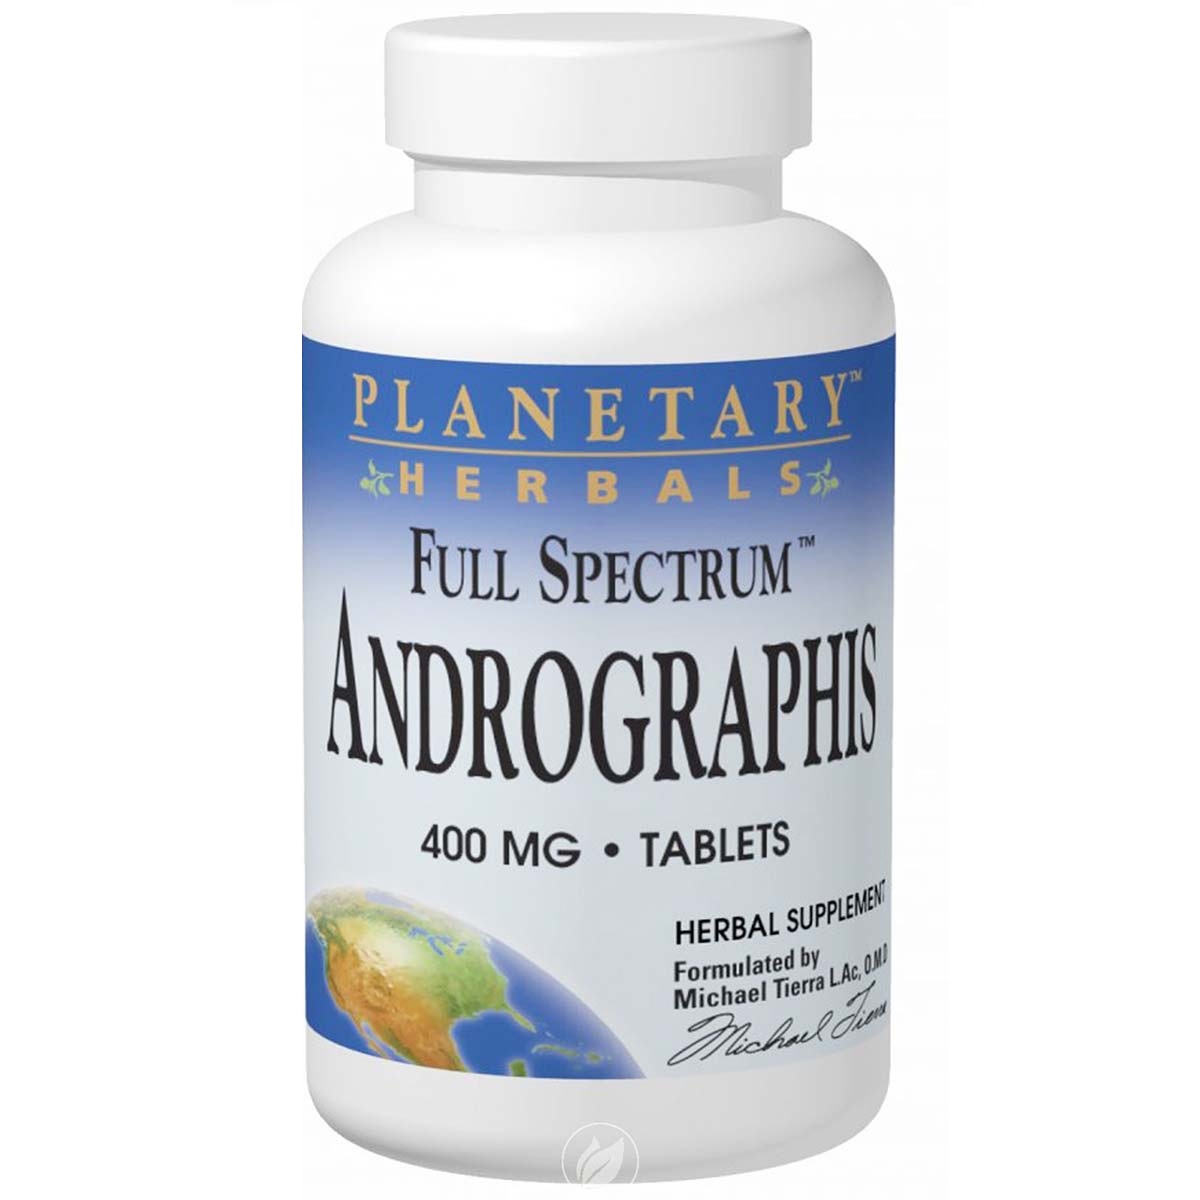 Planetary Herbals Andrographis Full Spectrum, 400 mg, 60 Tablets